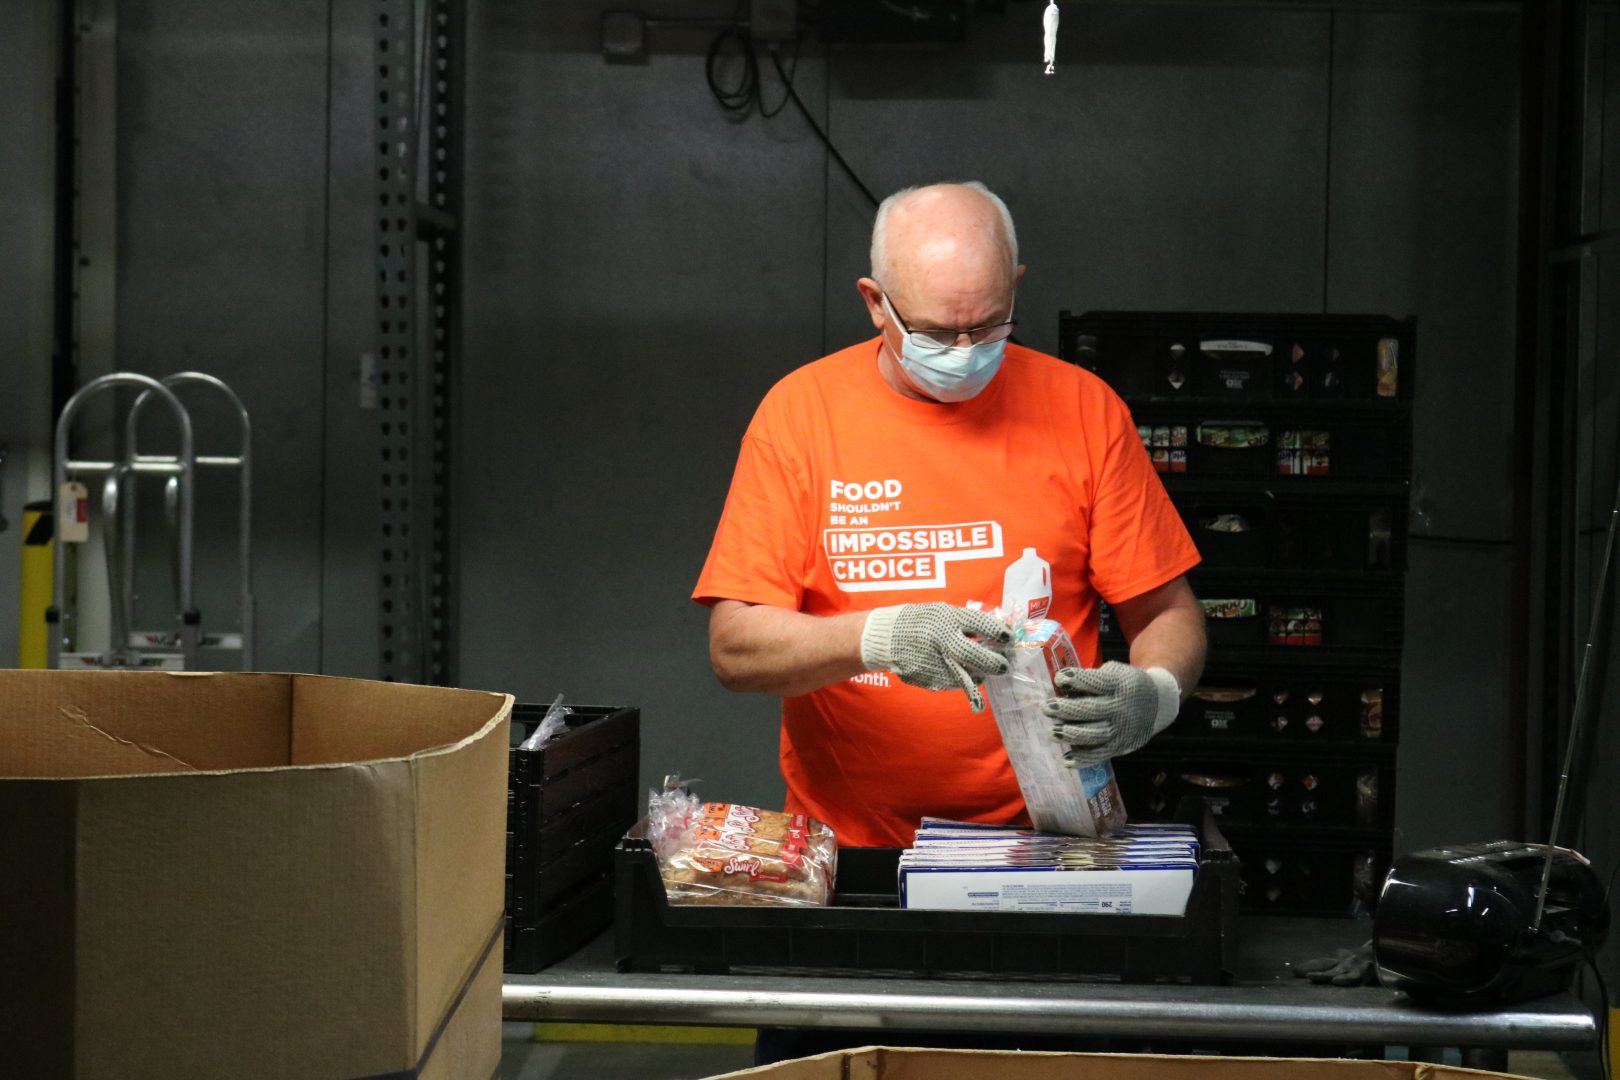 A man in an orange shirt and mask diligently works on a box